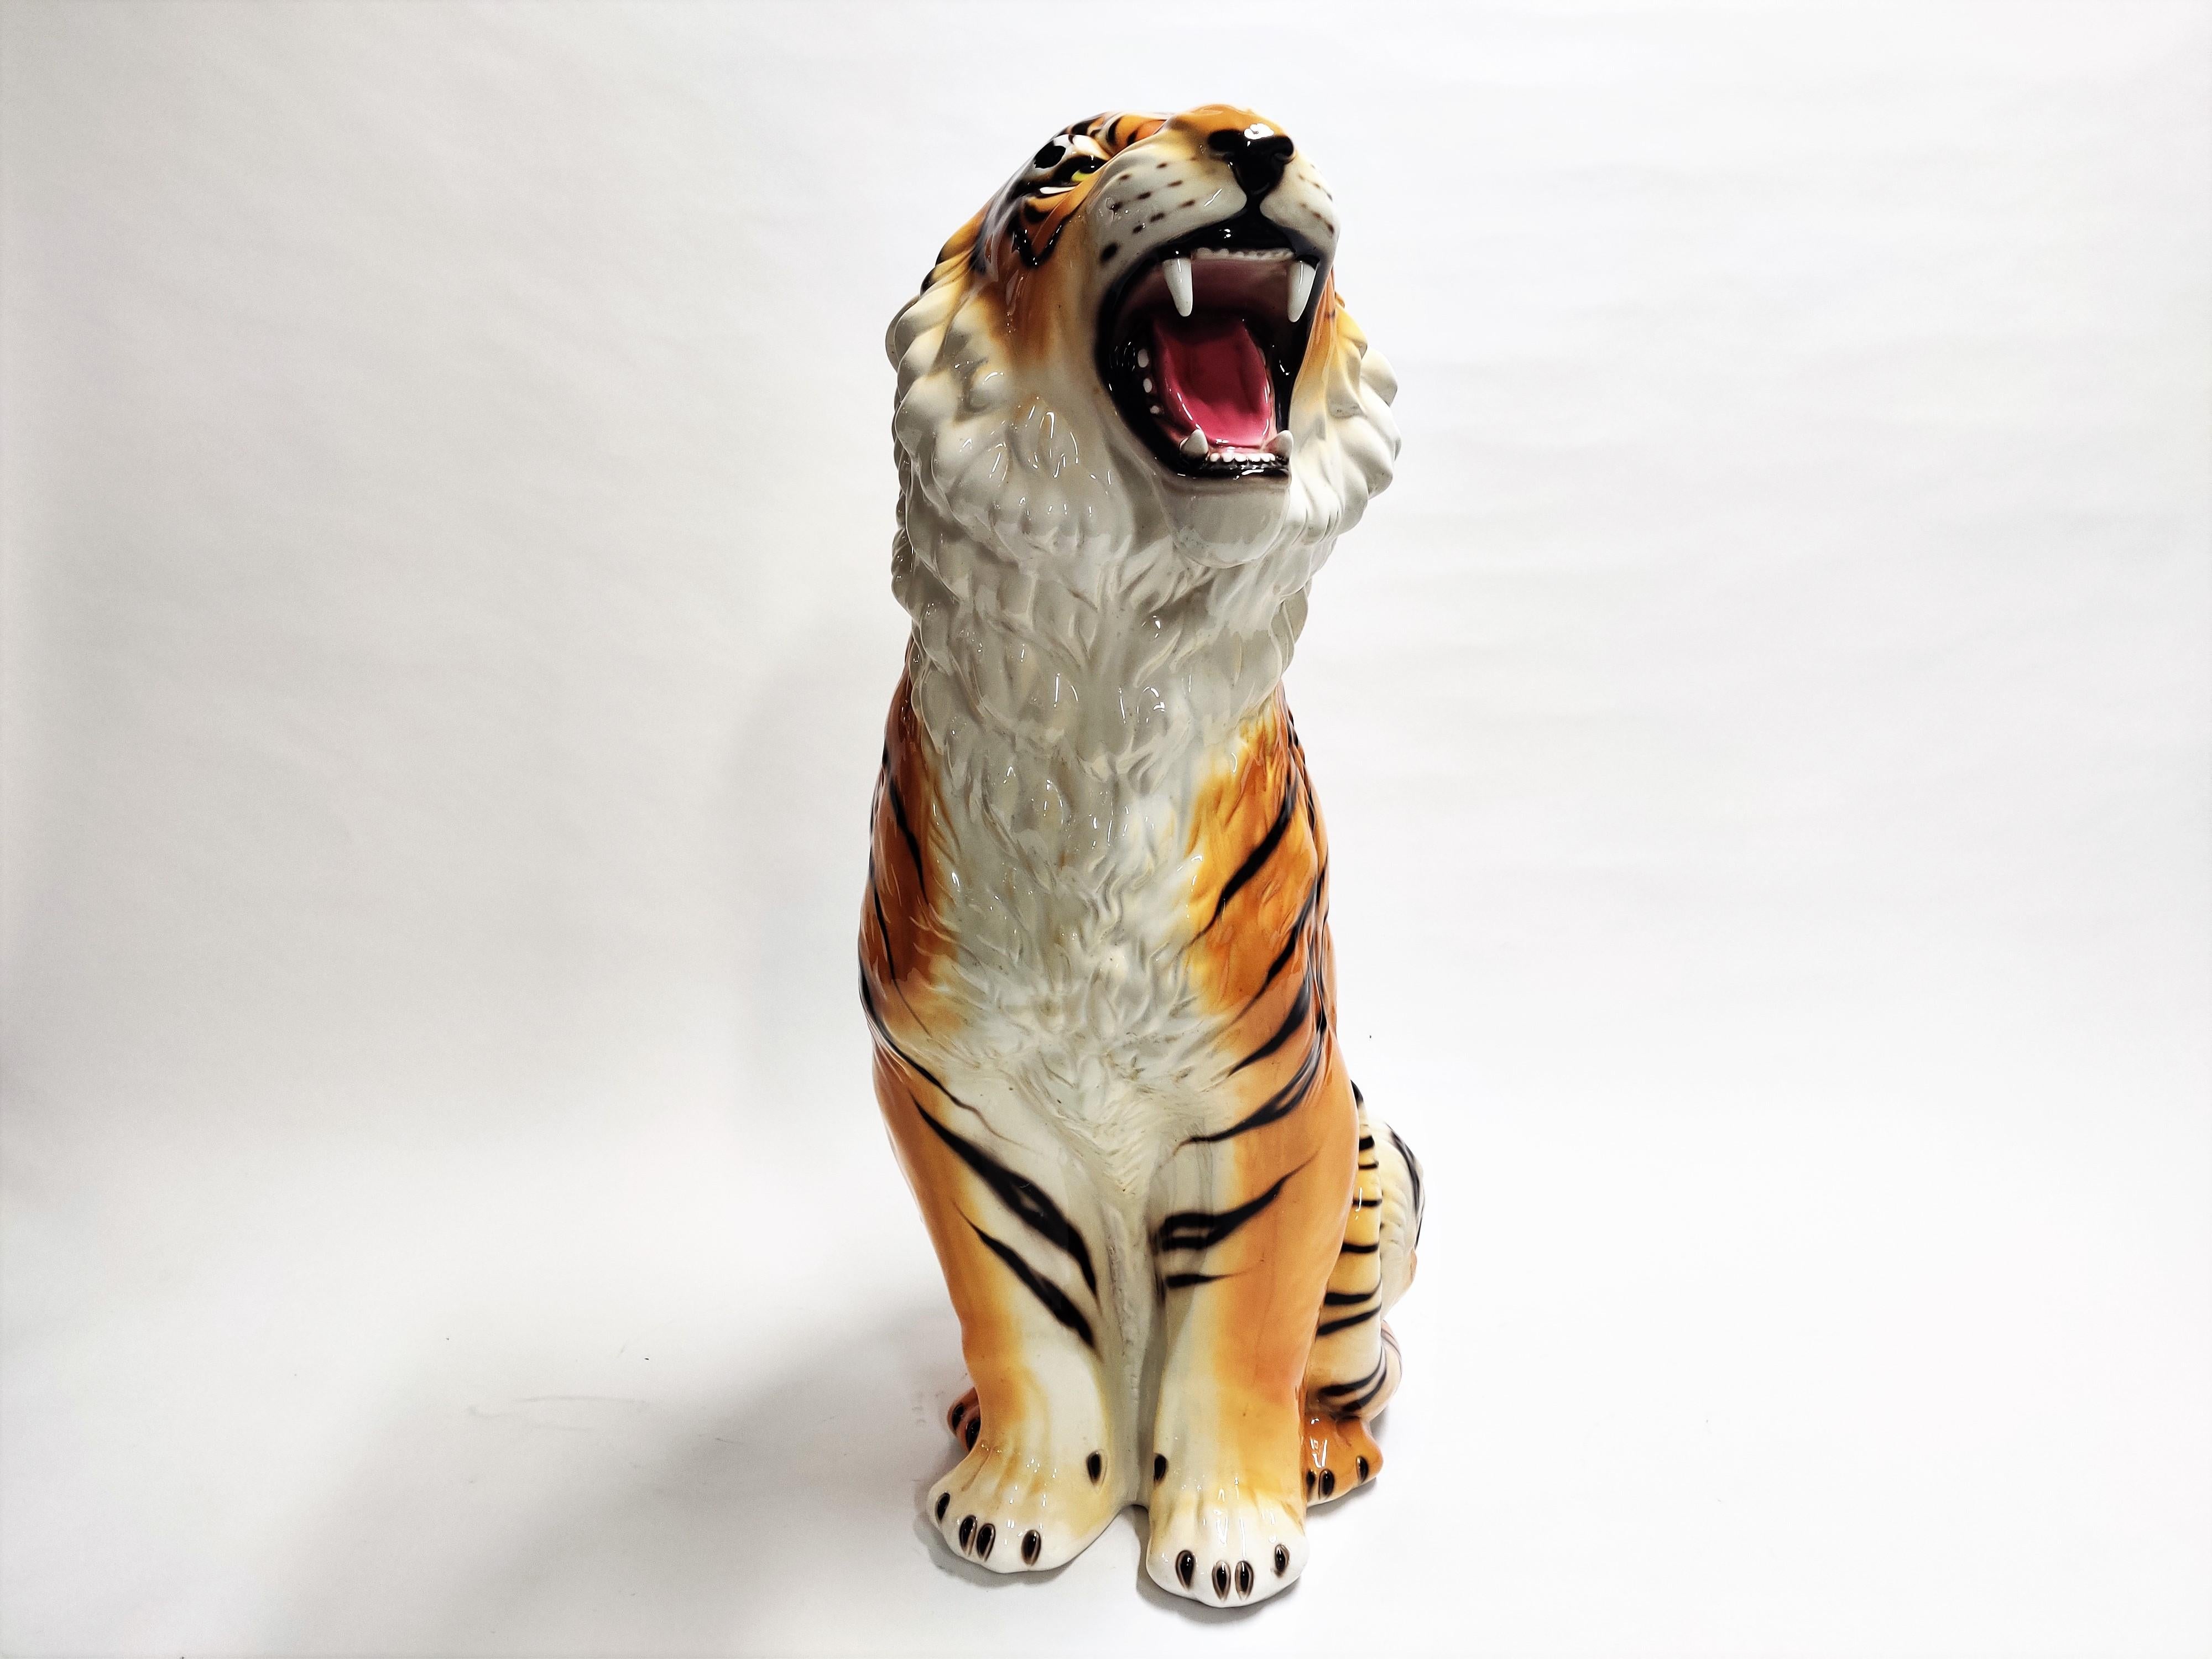 Huge hand painted ceramic tiger figure made in Italy.

Beautiful details.

1970s - Italy

Very good condition.

Dimensions: 
Height 105cm/41.33